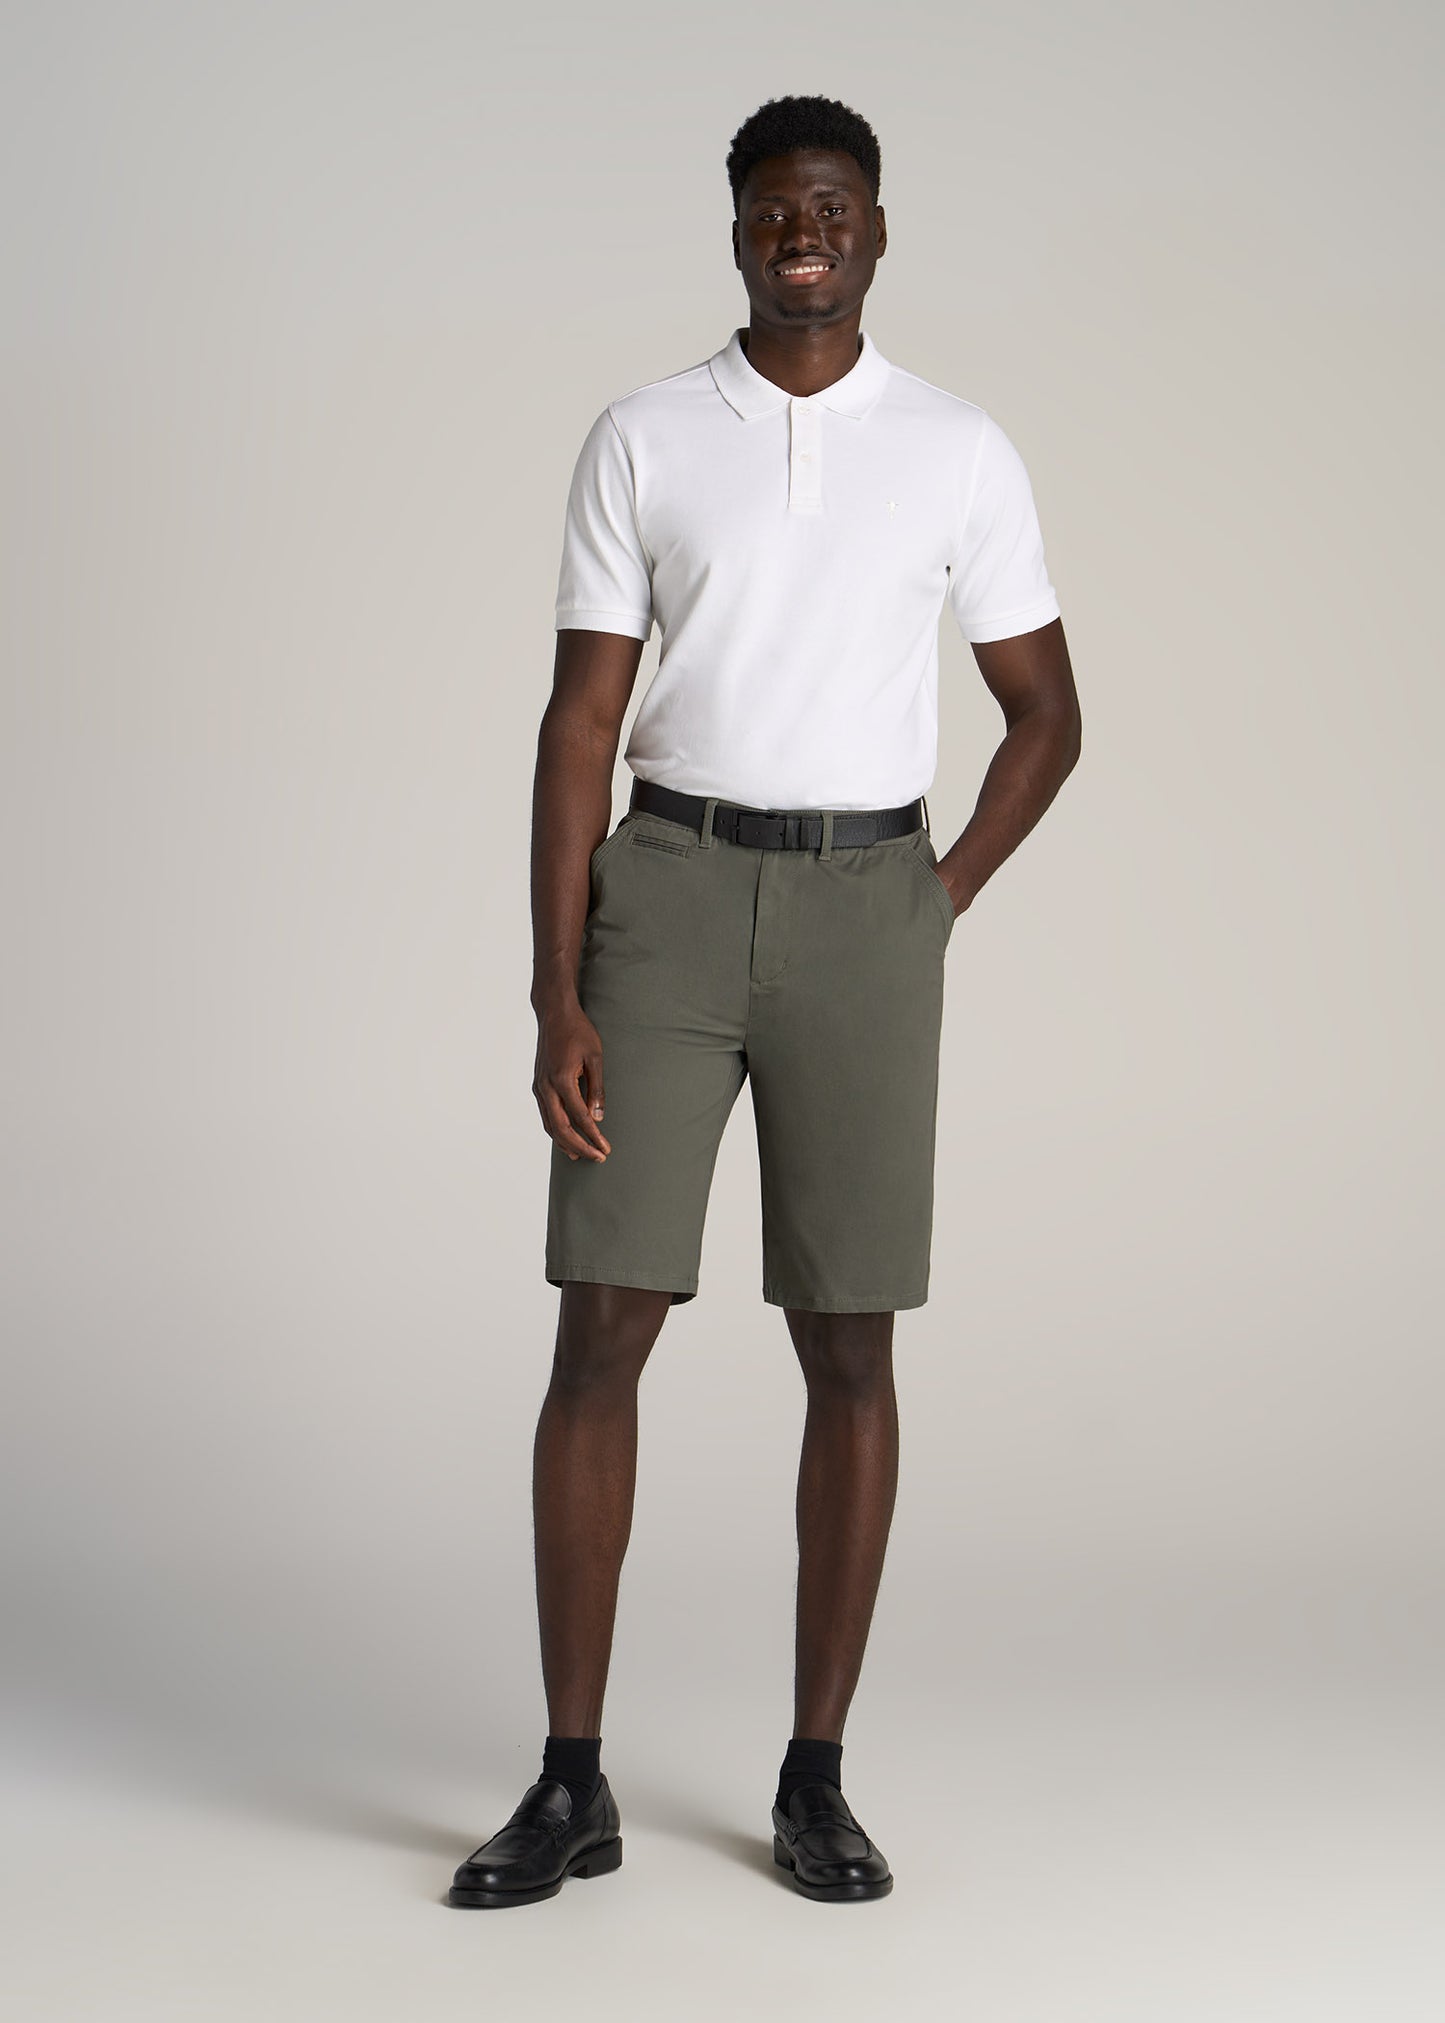 Chino Shorts for Tall Men in Spring Olive